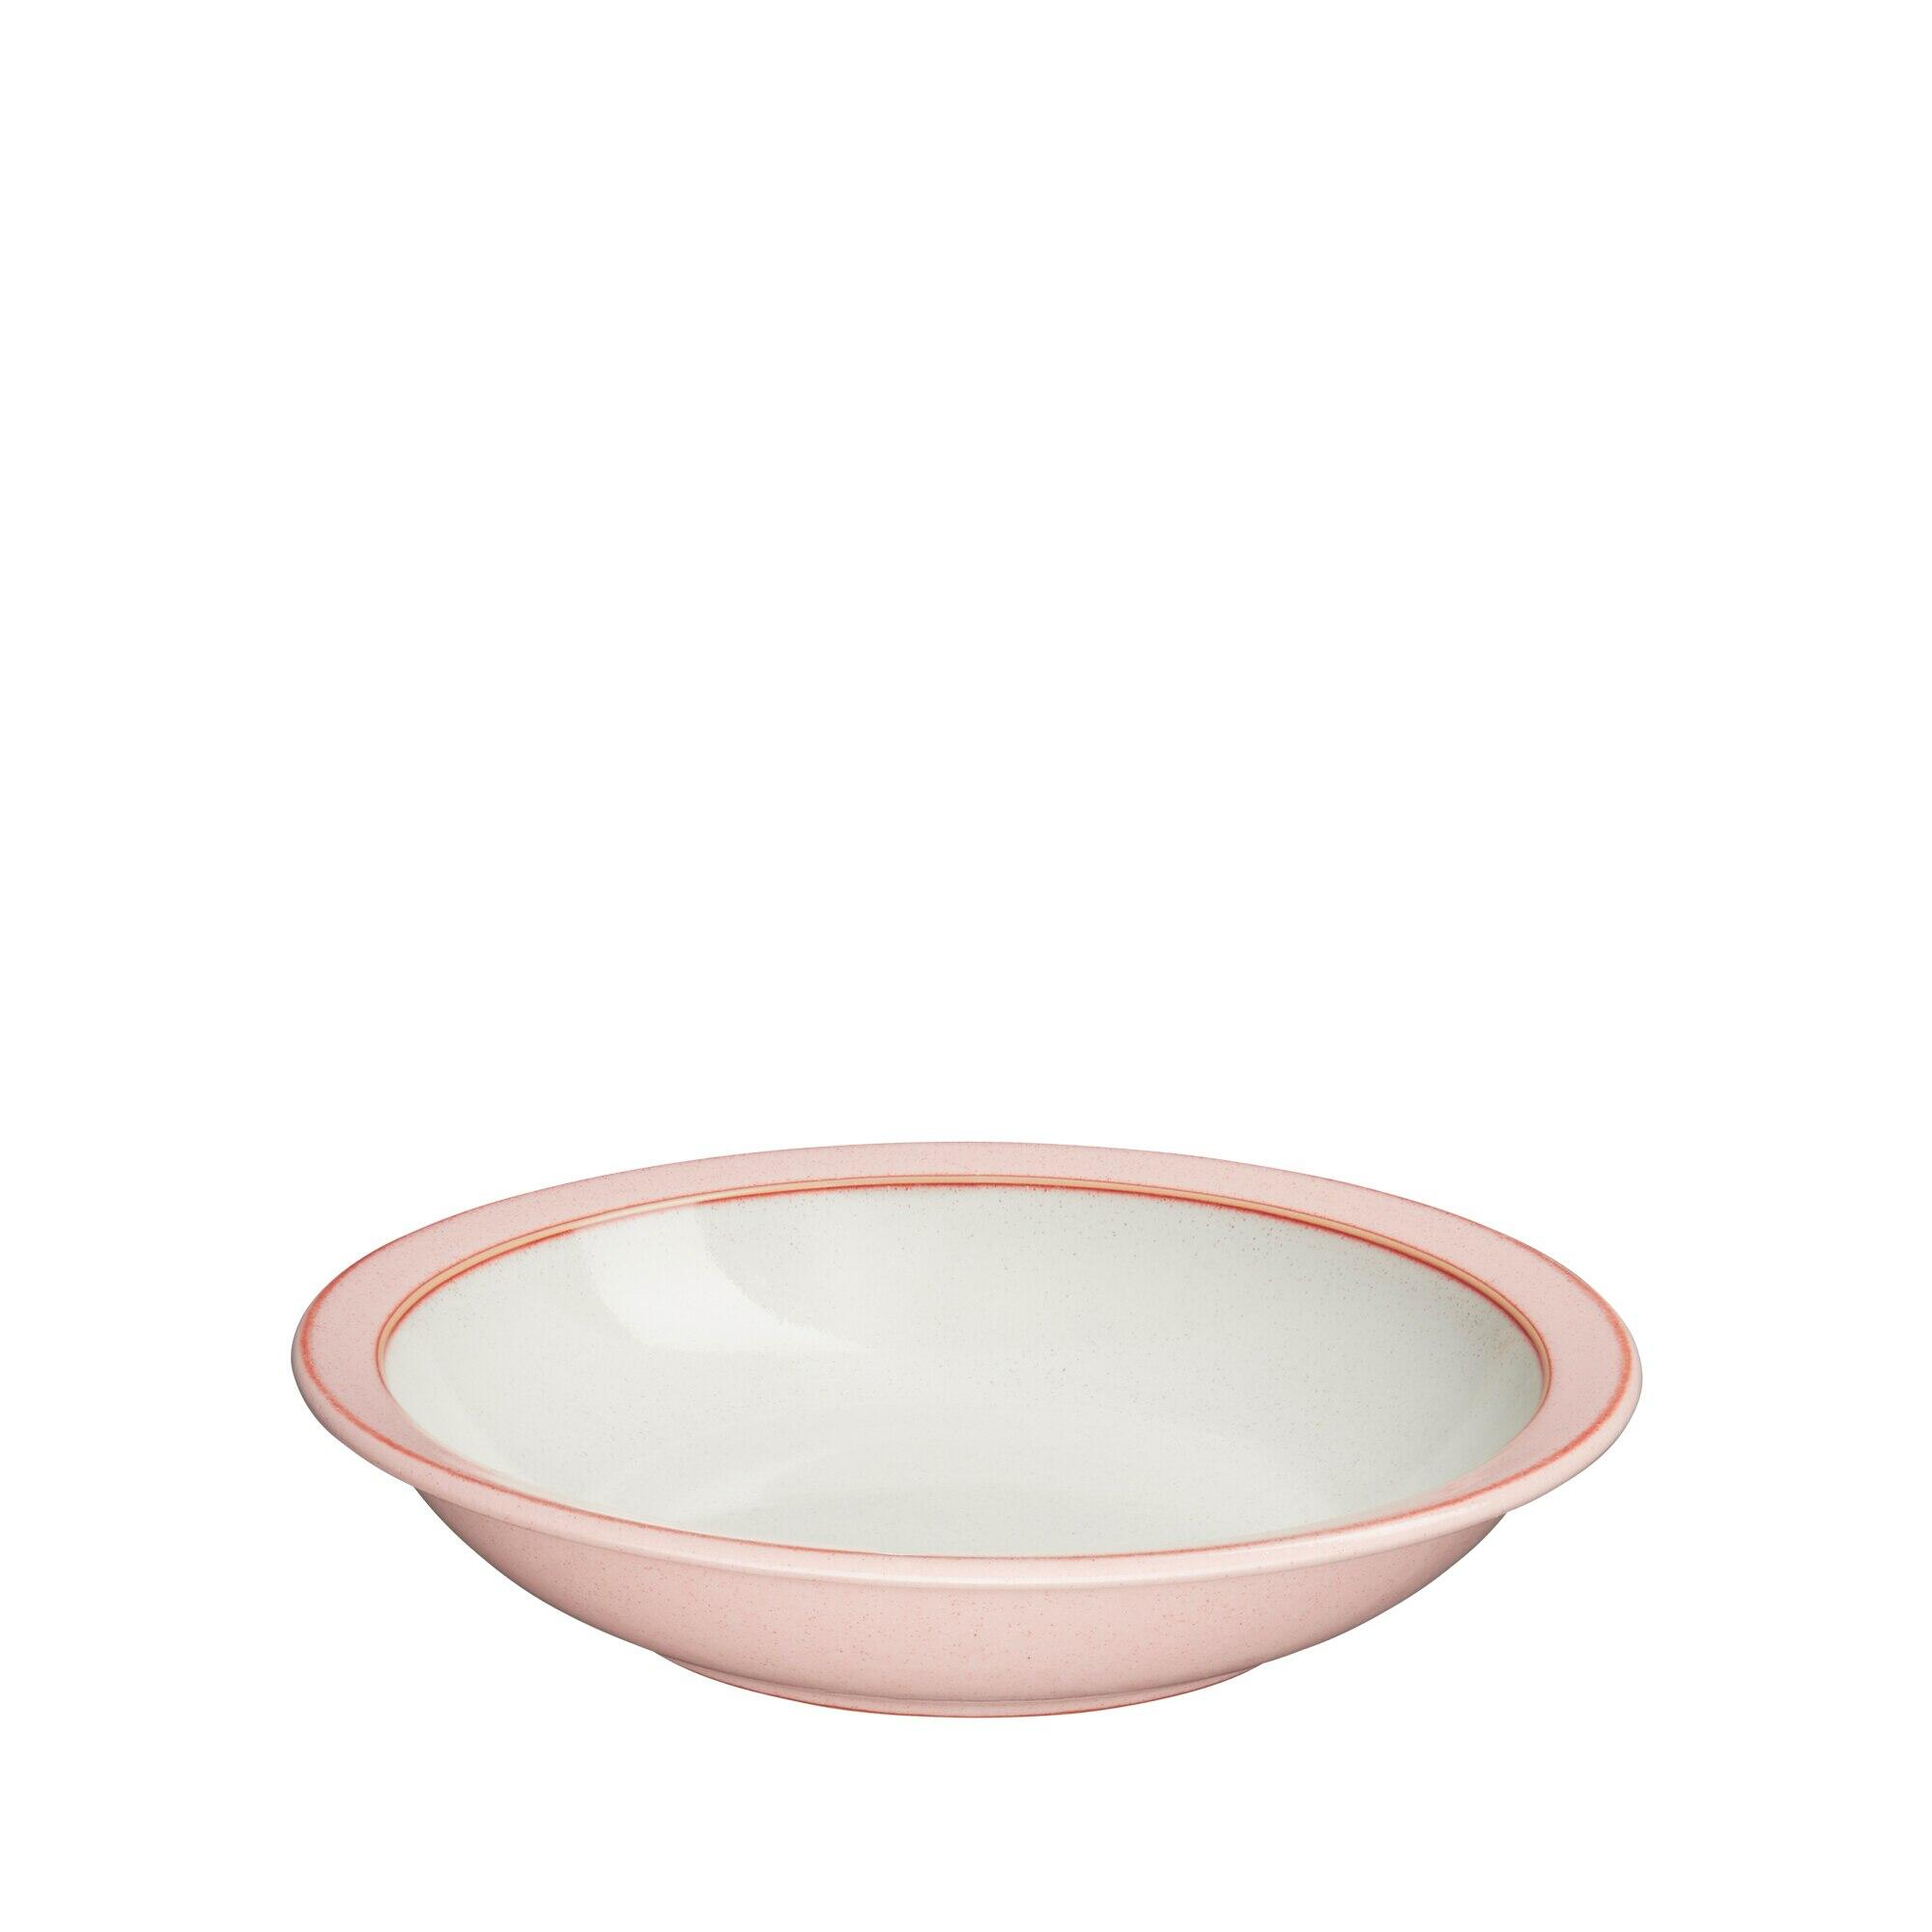 Heritage Piazza Shallow Rimmed Bowl